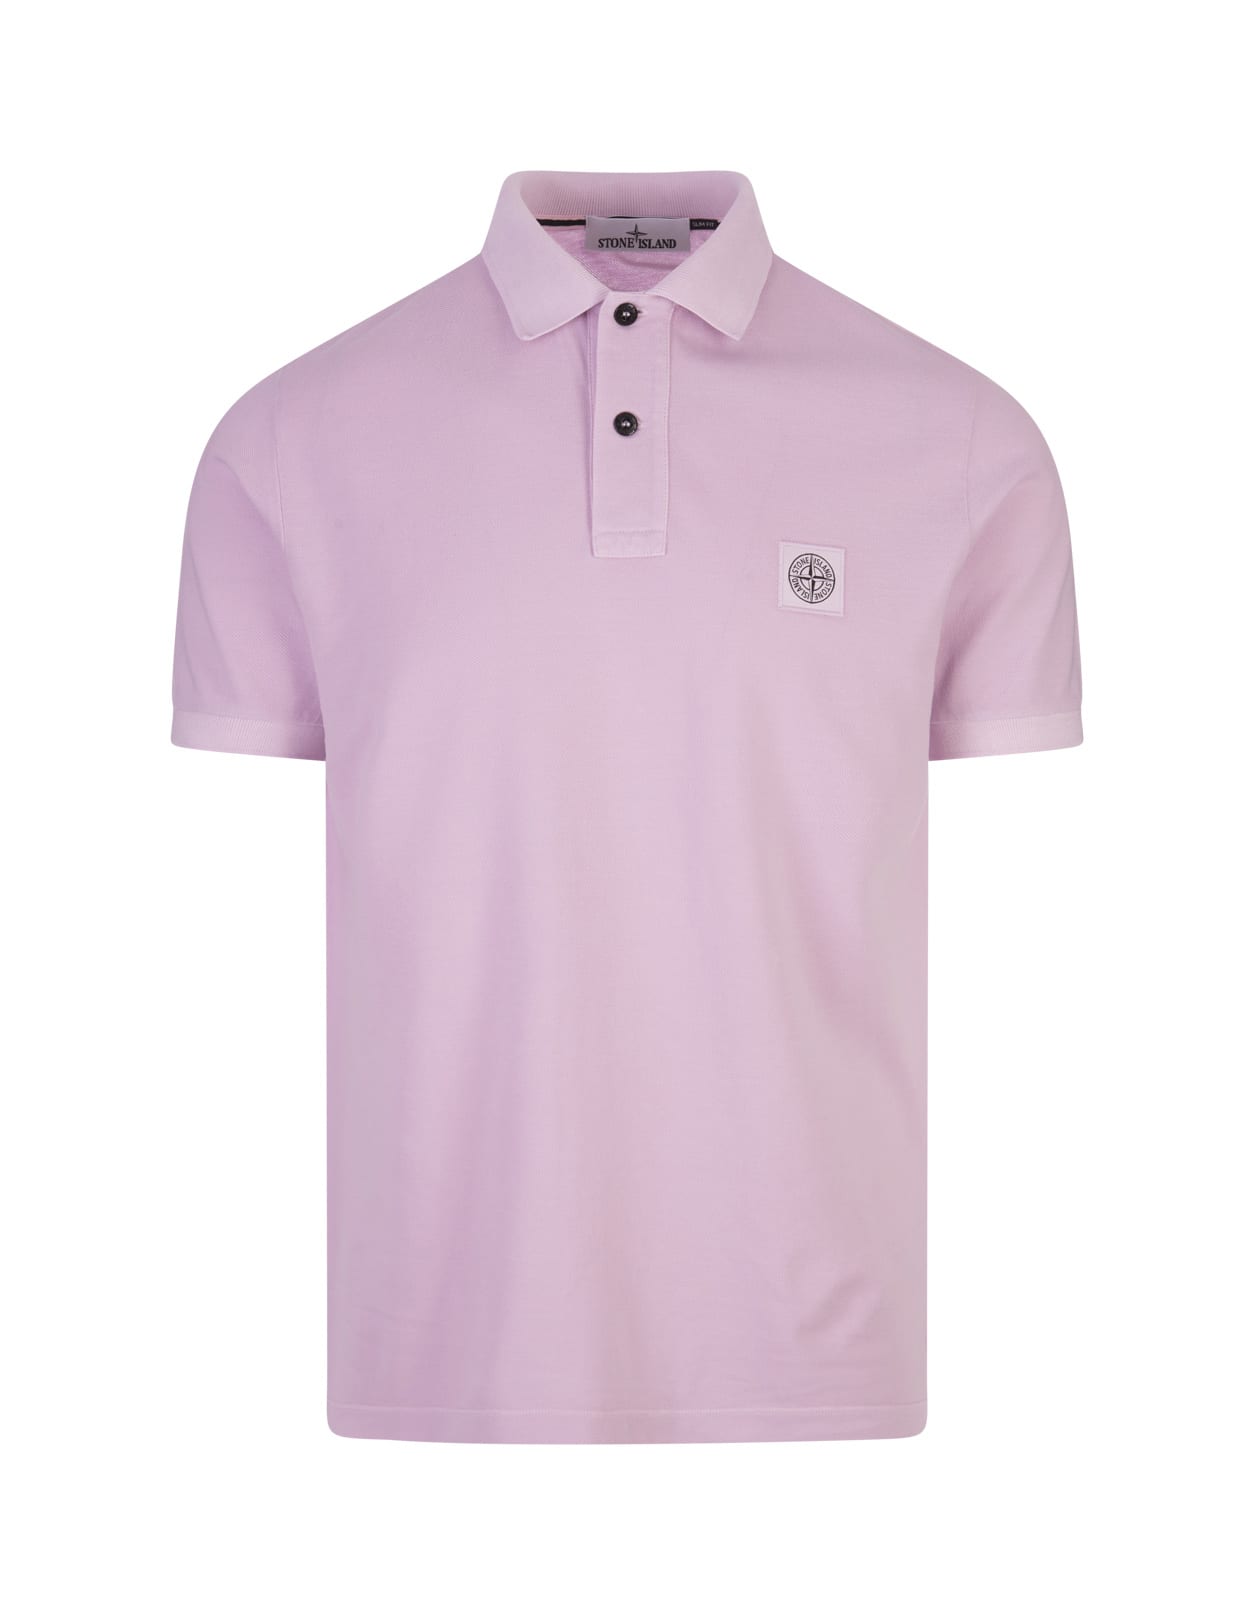 Stone Island Pink Pigment Dyed Slim Fit Polo Shirt